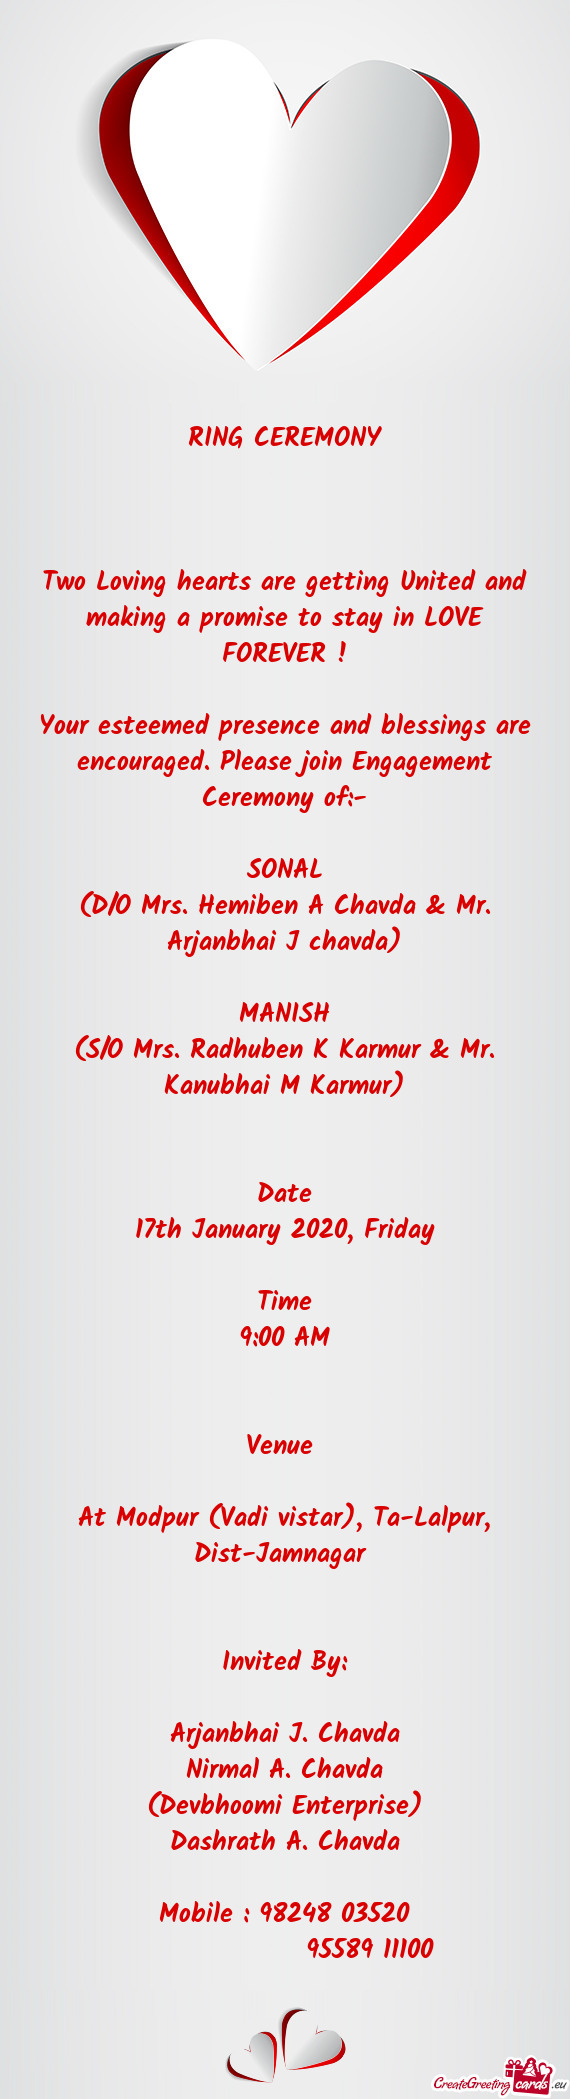 Your esteemed presence and blessings are encouraged. Please join Engagement Ceremony of: